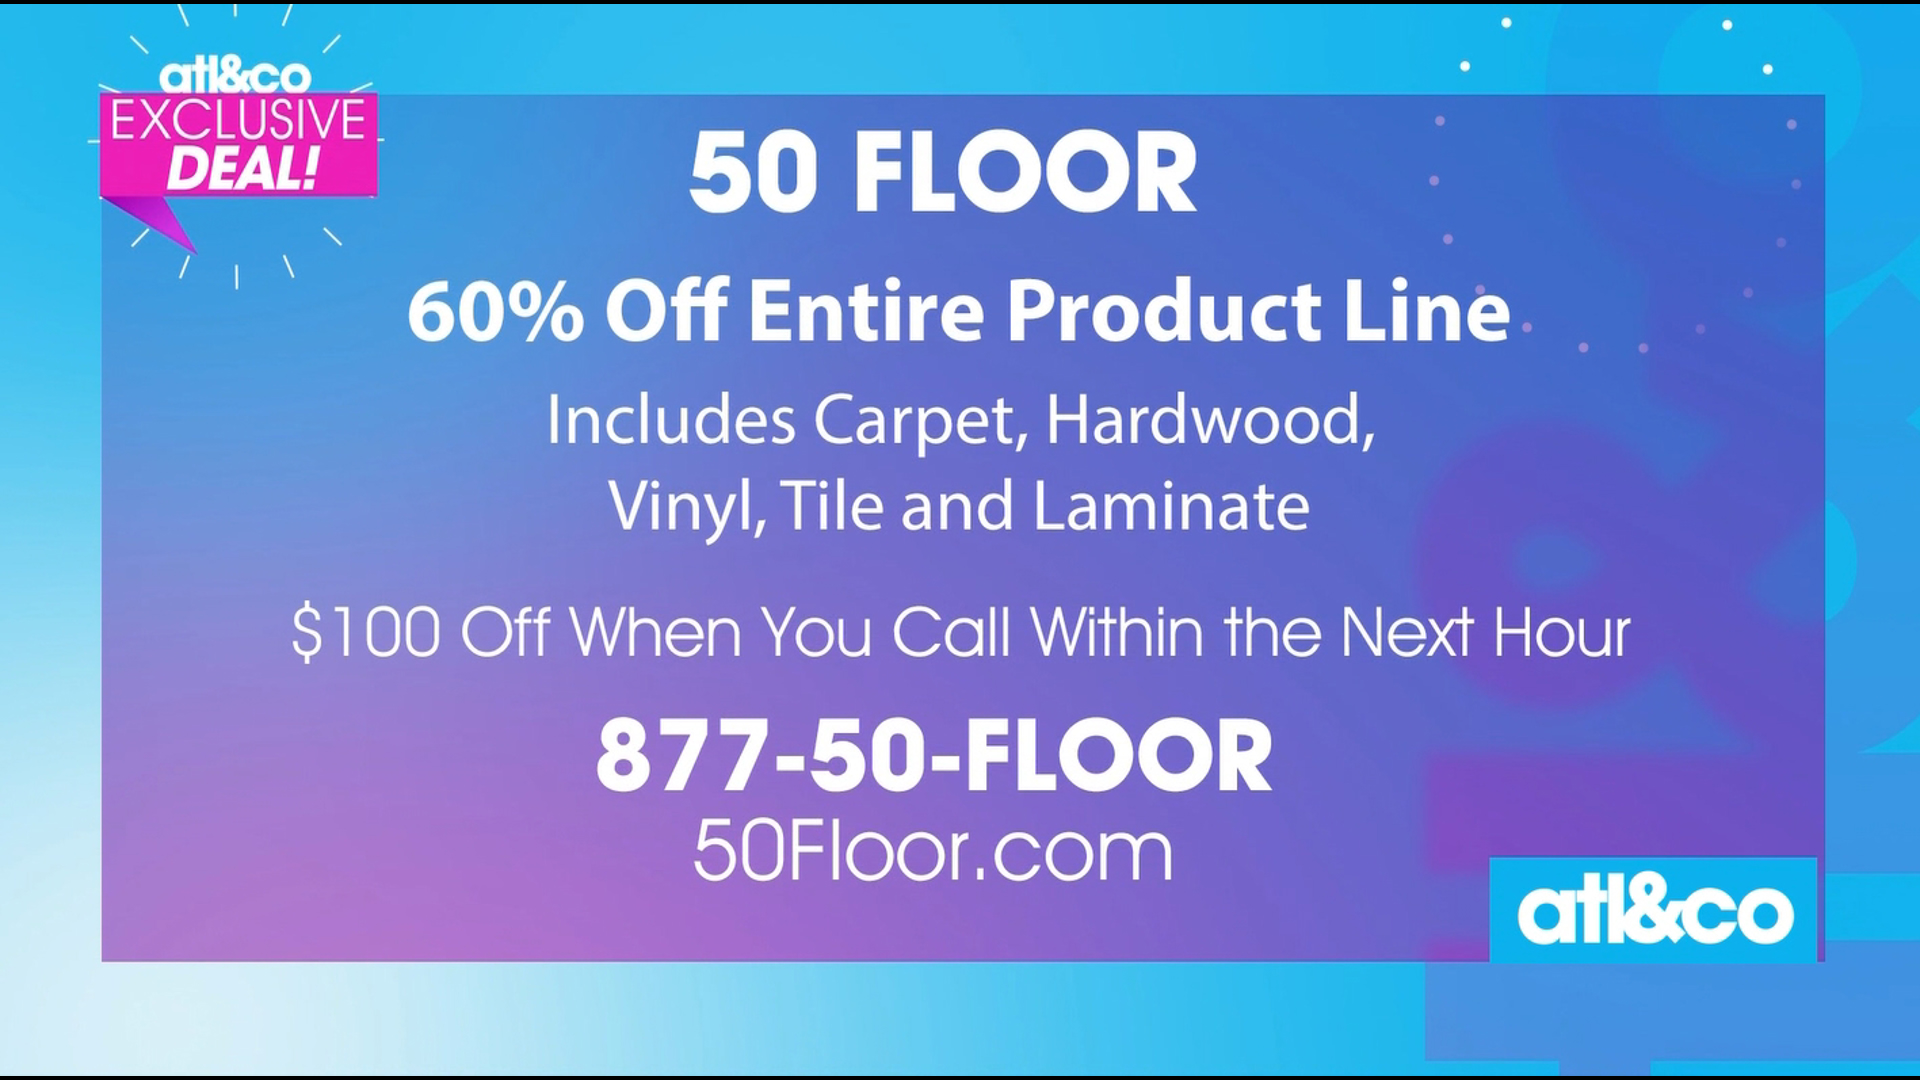 Remodel with 50 Floor and get 60% off your entire order.